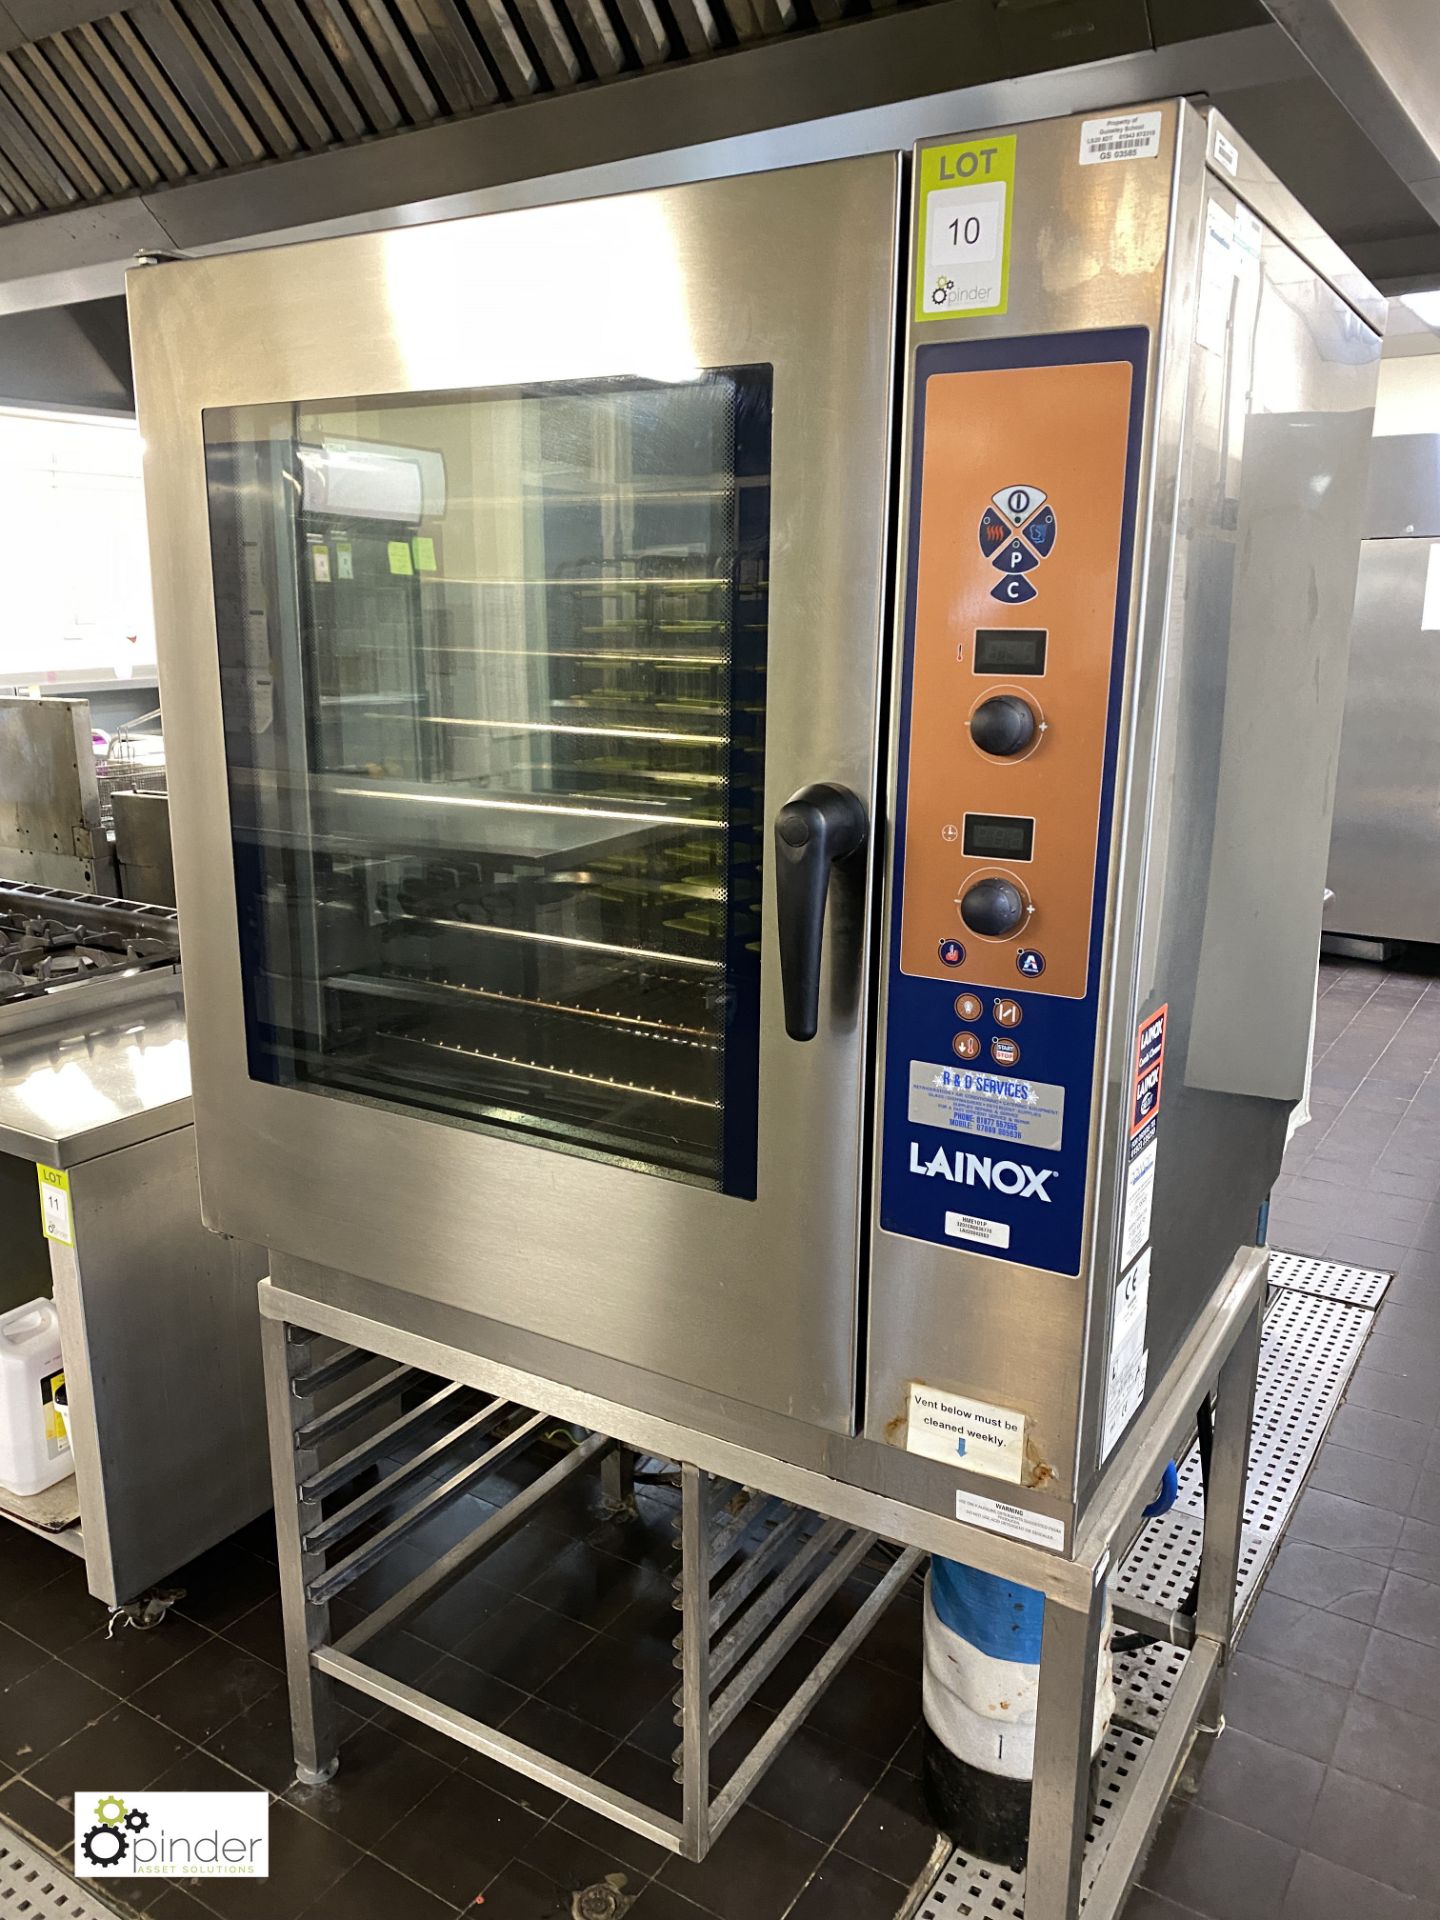 Lainox HME101P Combi Oven, 1000mm wide x 860mm deep x 1100mm high, 400volts, with stainless steel - Image 4 of 8